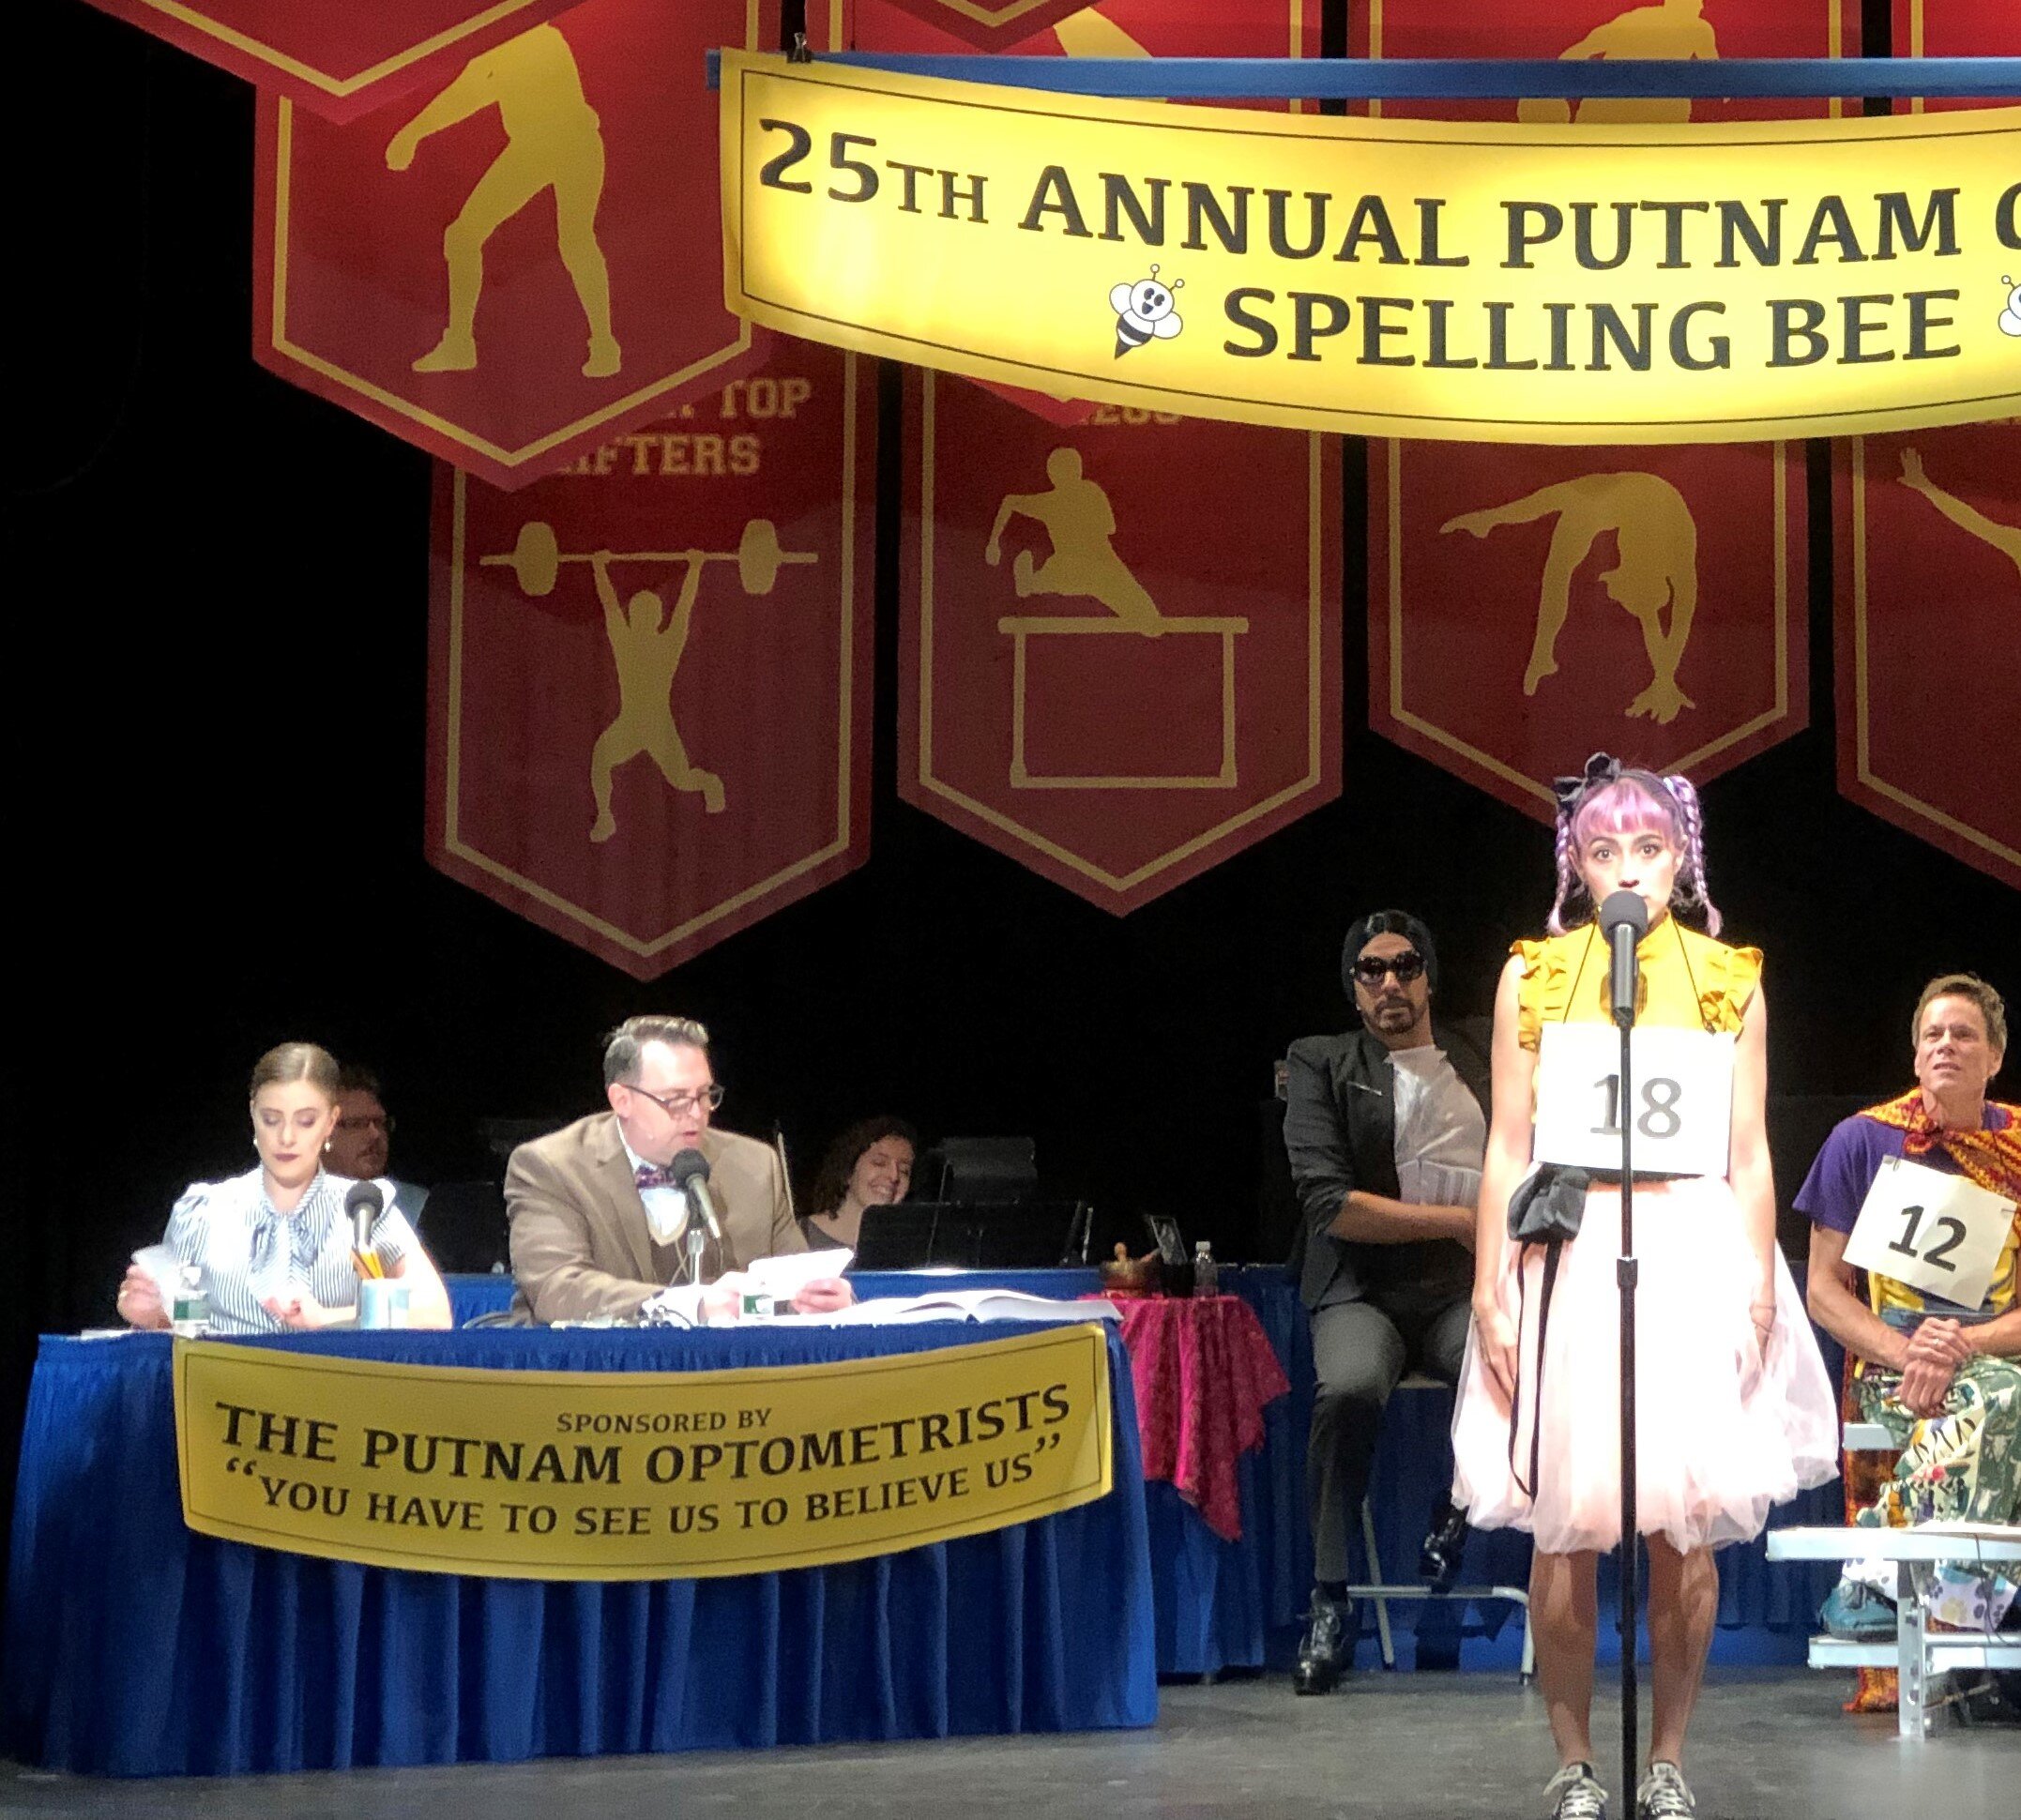 Vice Principal Panch in The 25th Annual Putnam County Spelling Bee